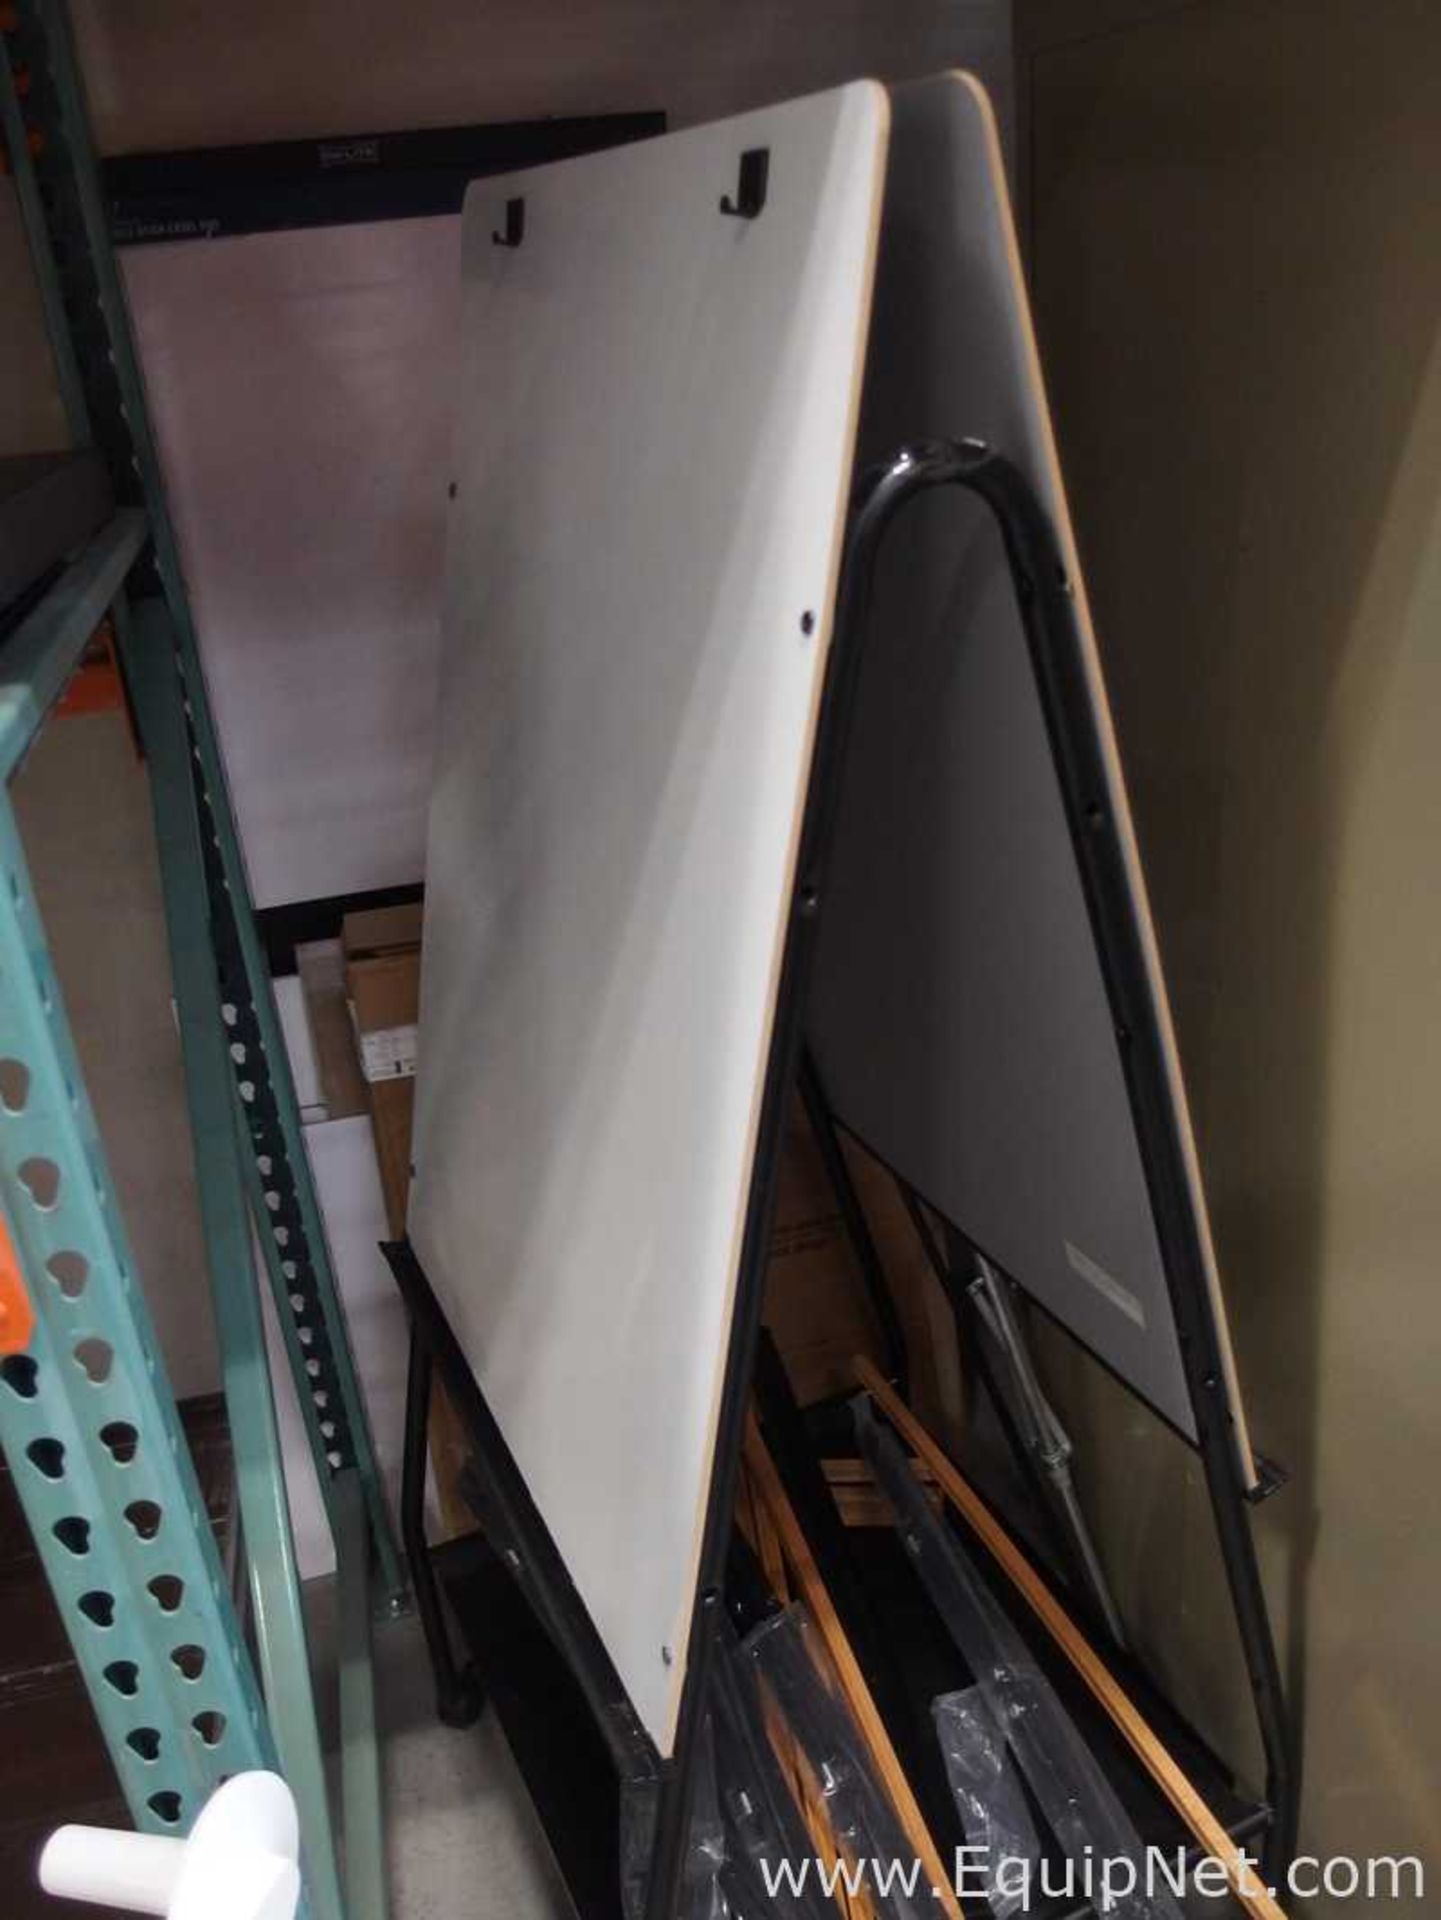 Lot of Assorted Whiteboards Easels and Cork Boards - Image 4 of 7